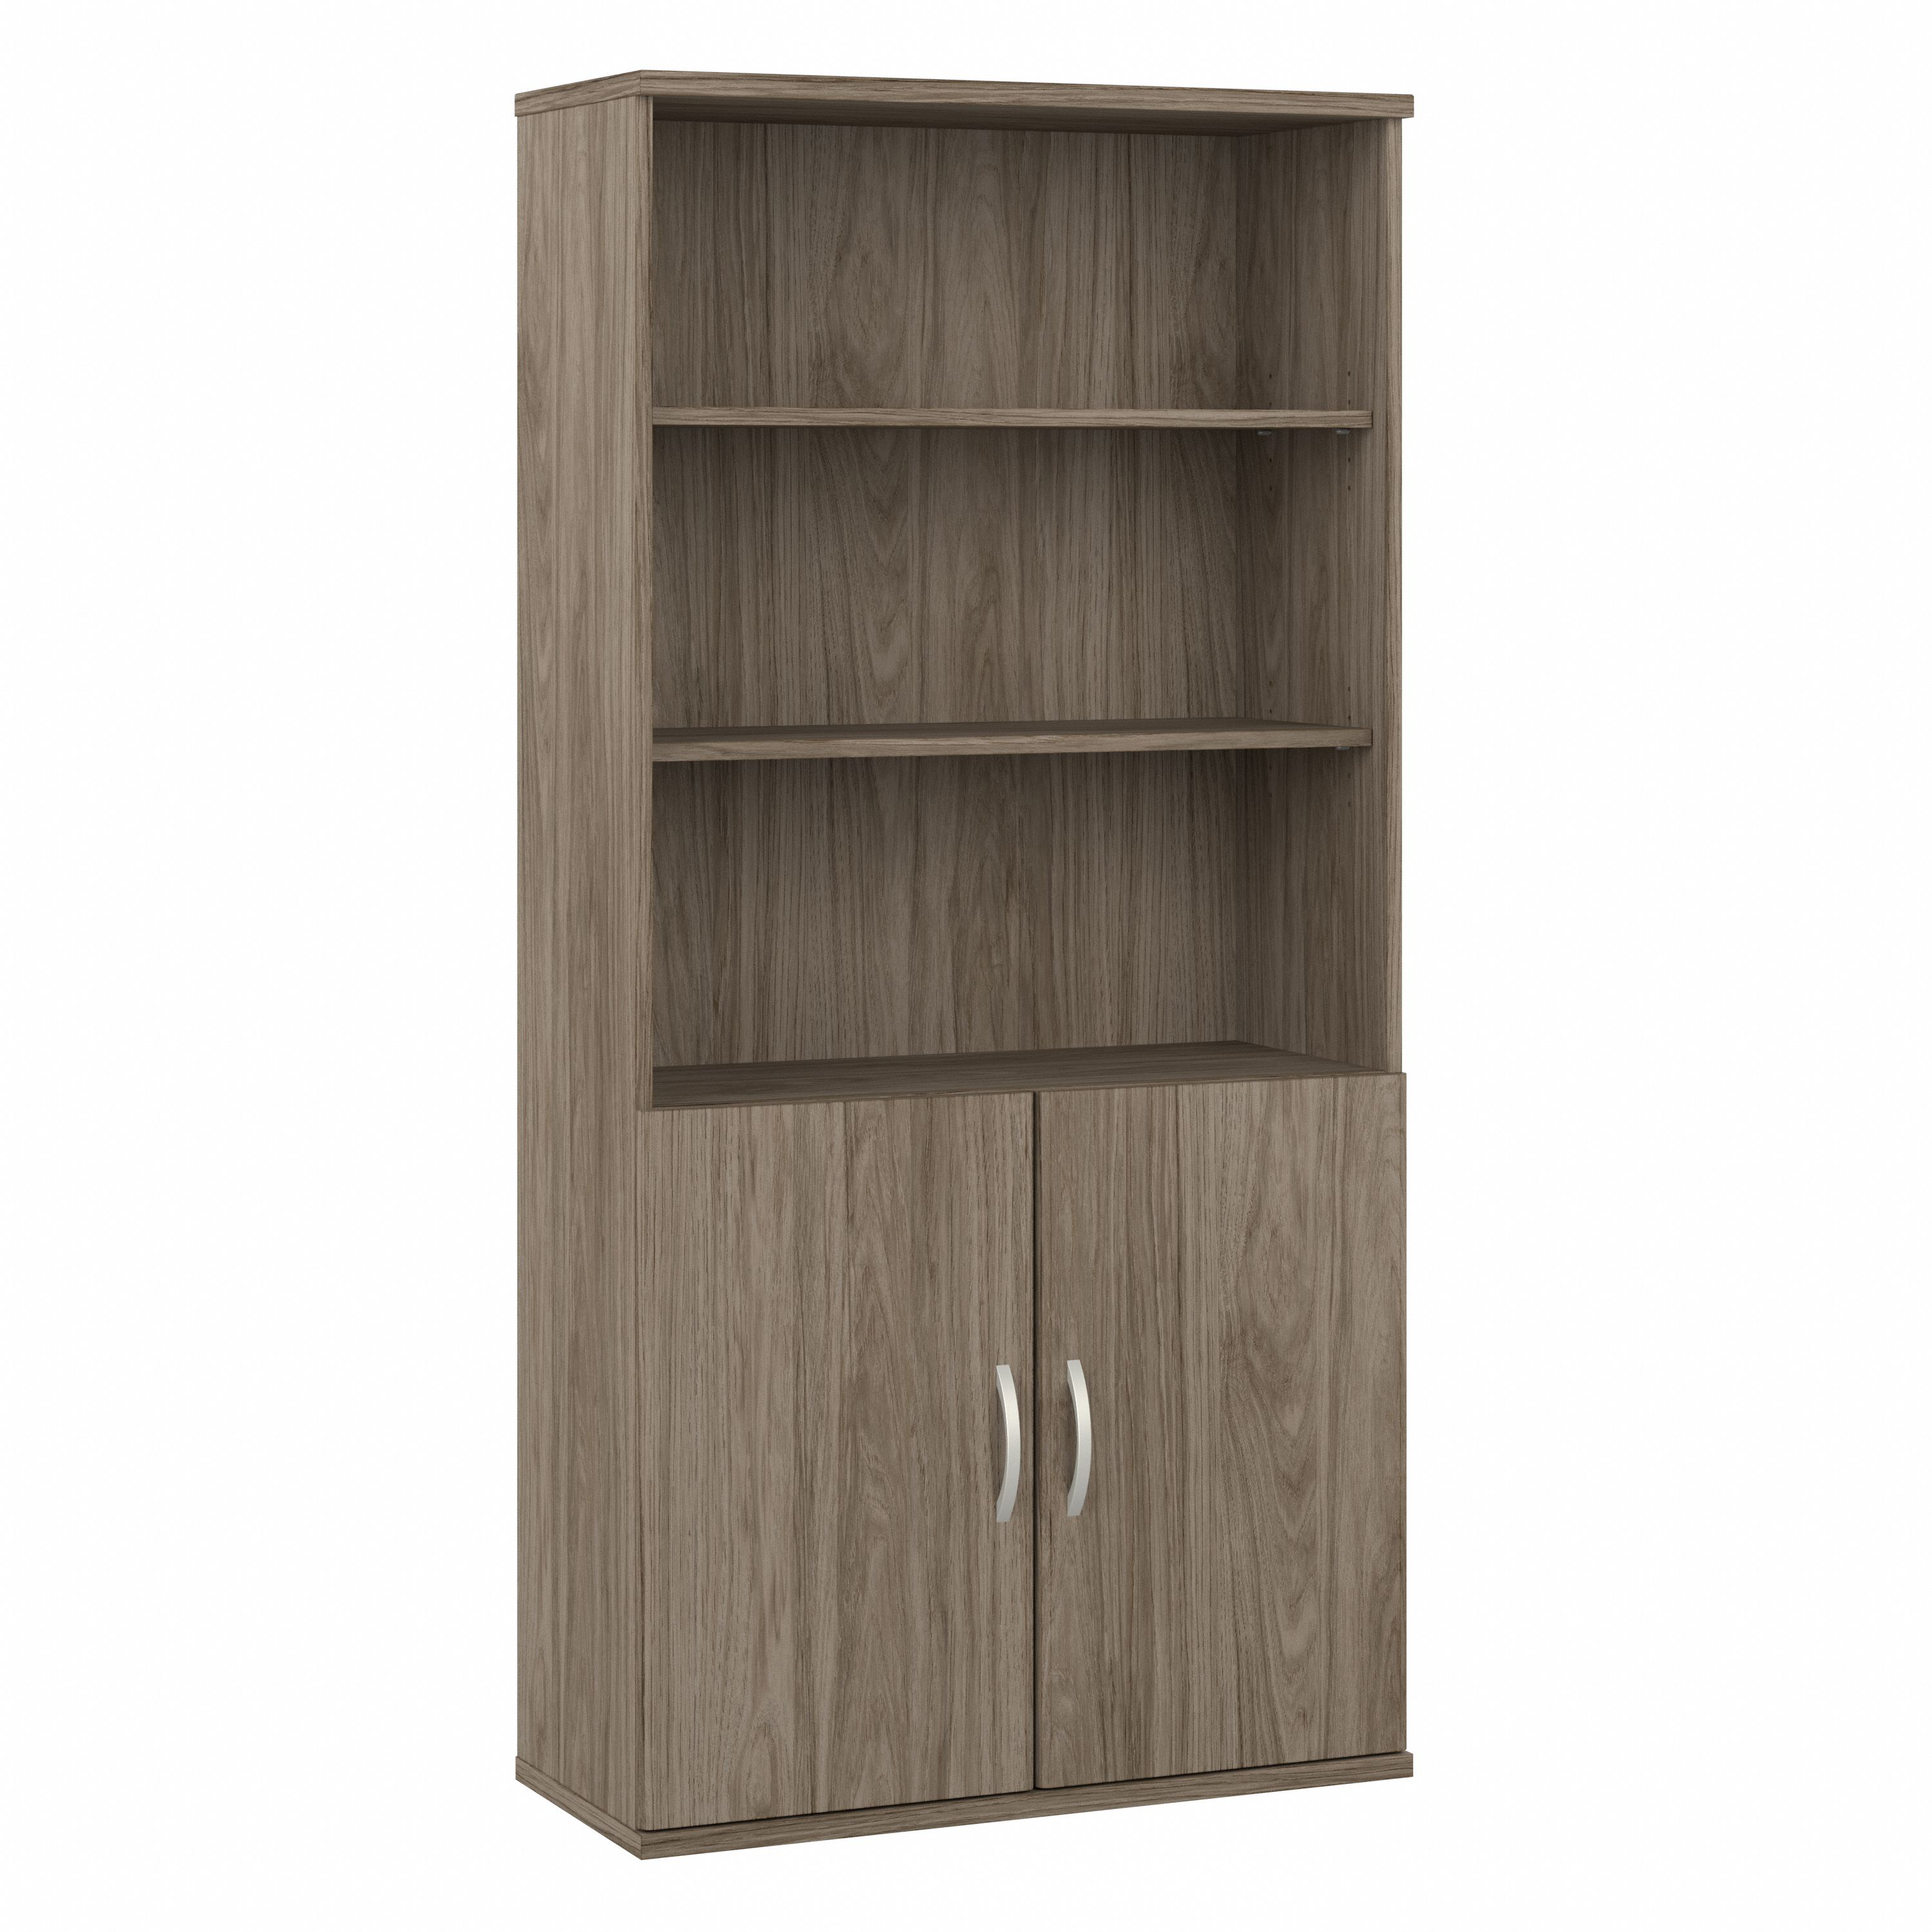 Shop Bush Business Furniture Studio C Tall 5 Shelf Bookcase with Doors 02 STC015MH #color_modern hickory